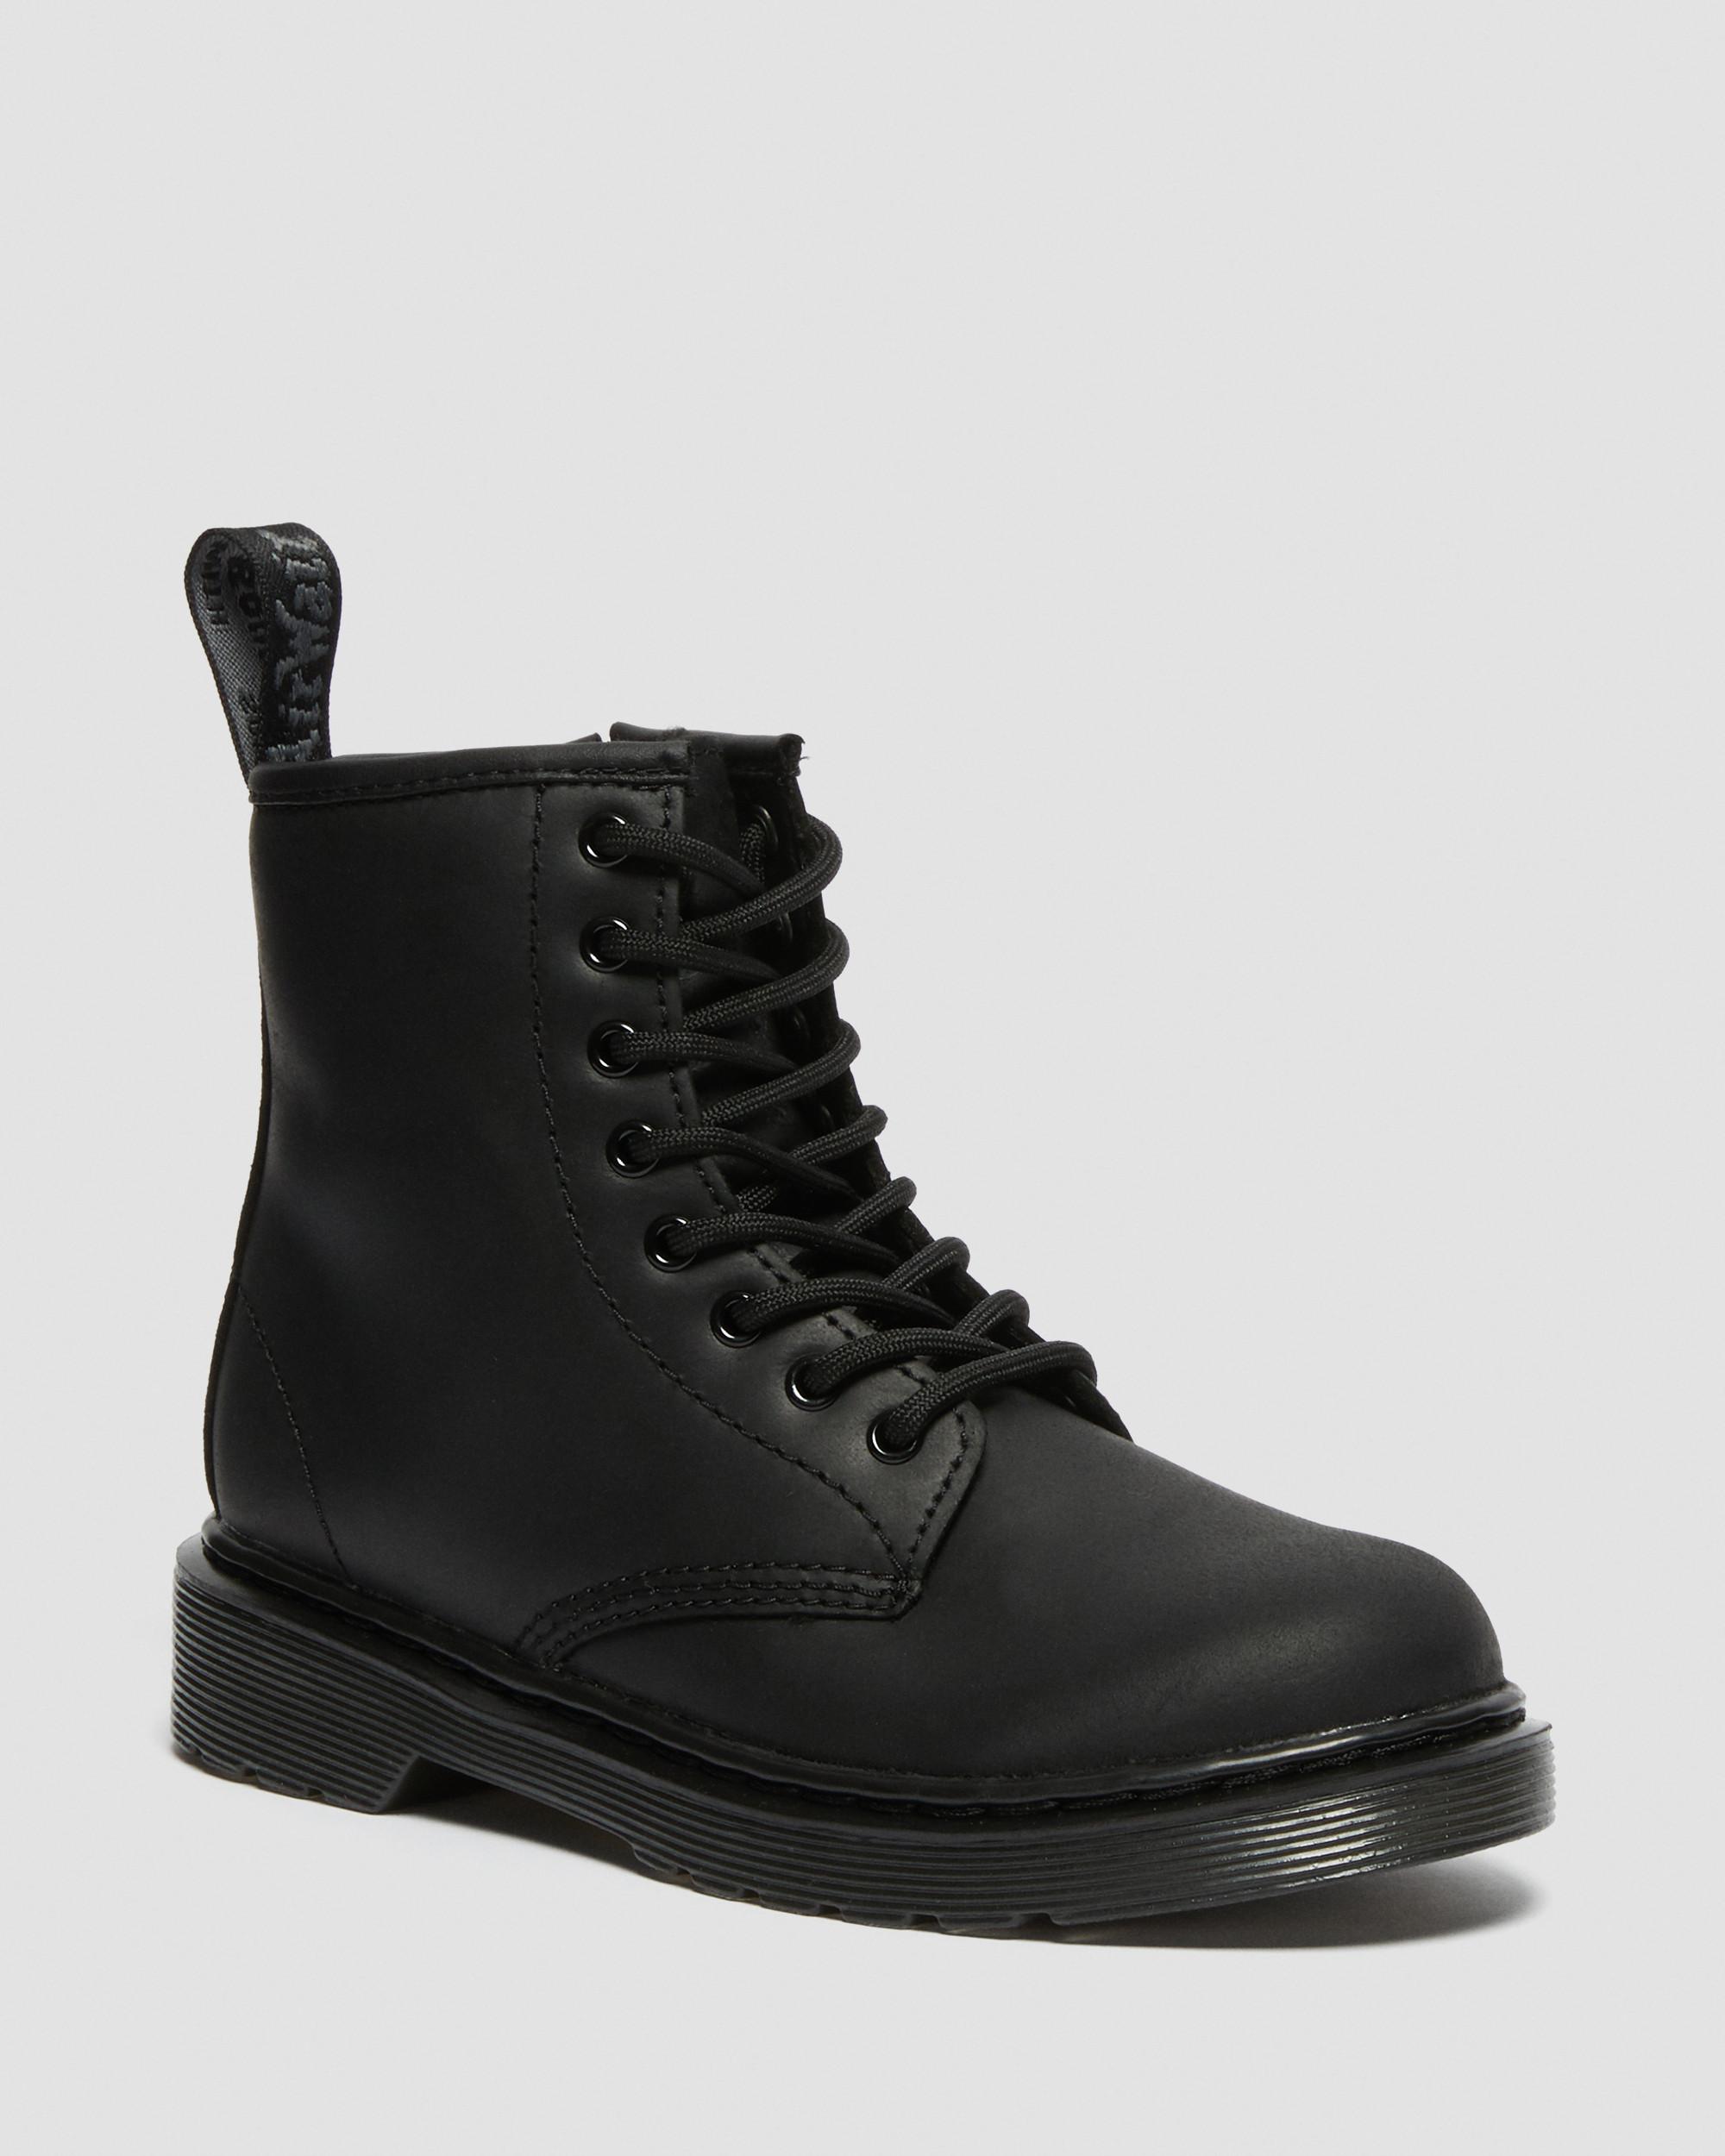 Junior 1460 Serena Faux Fur Lined Leather Boots in Black | Dr. Martens